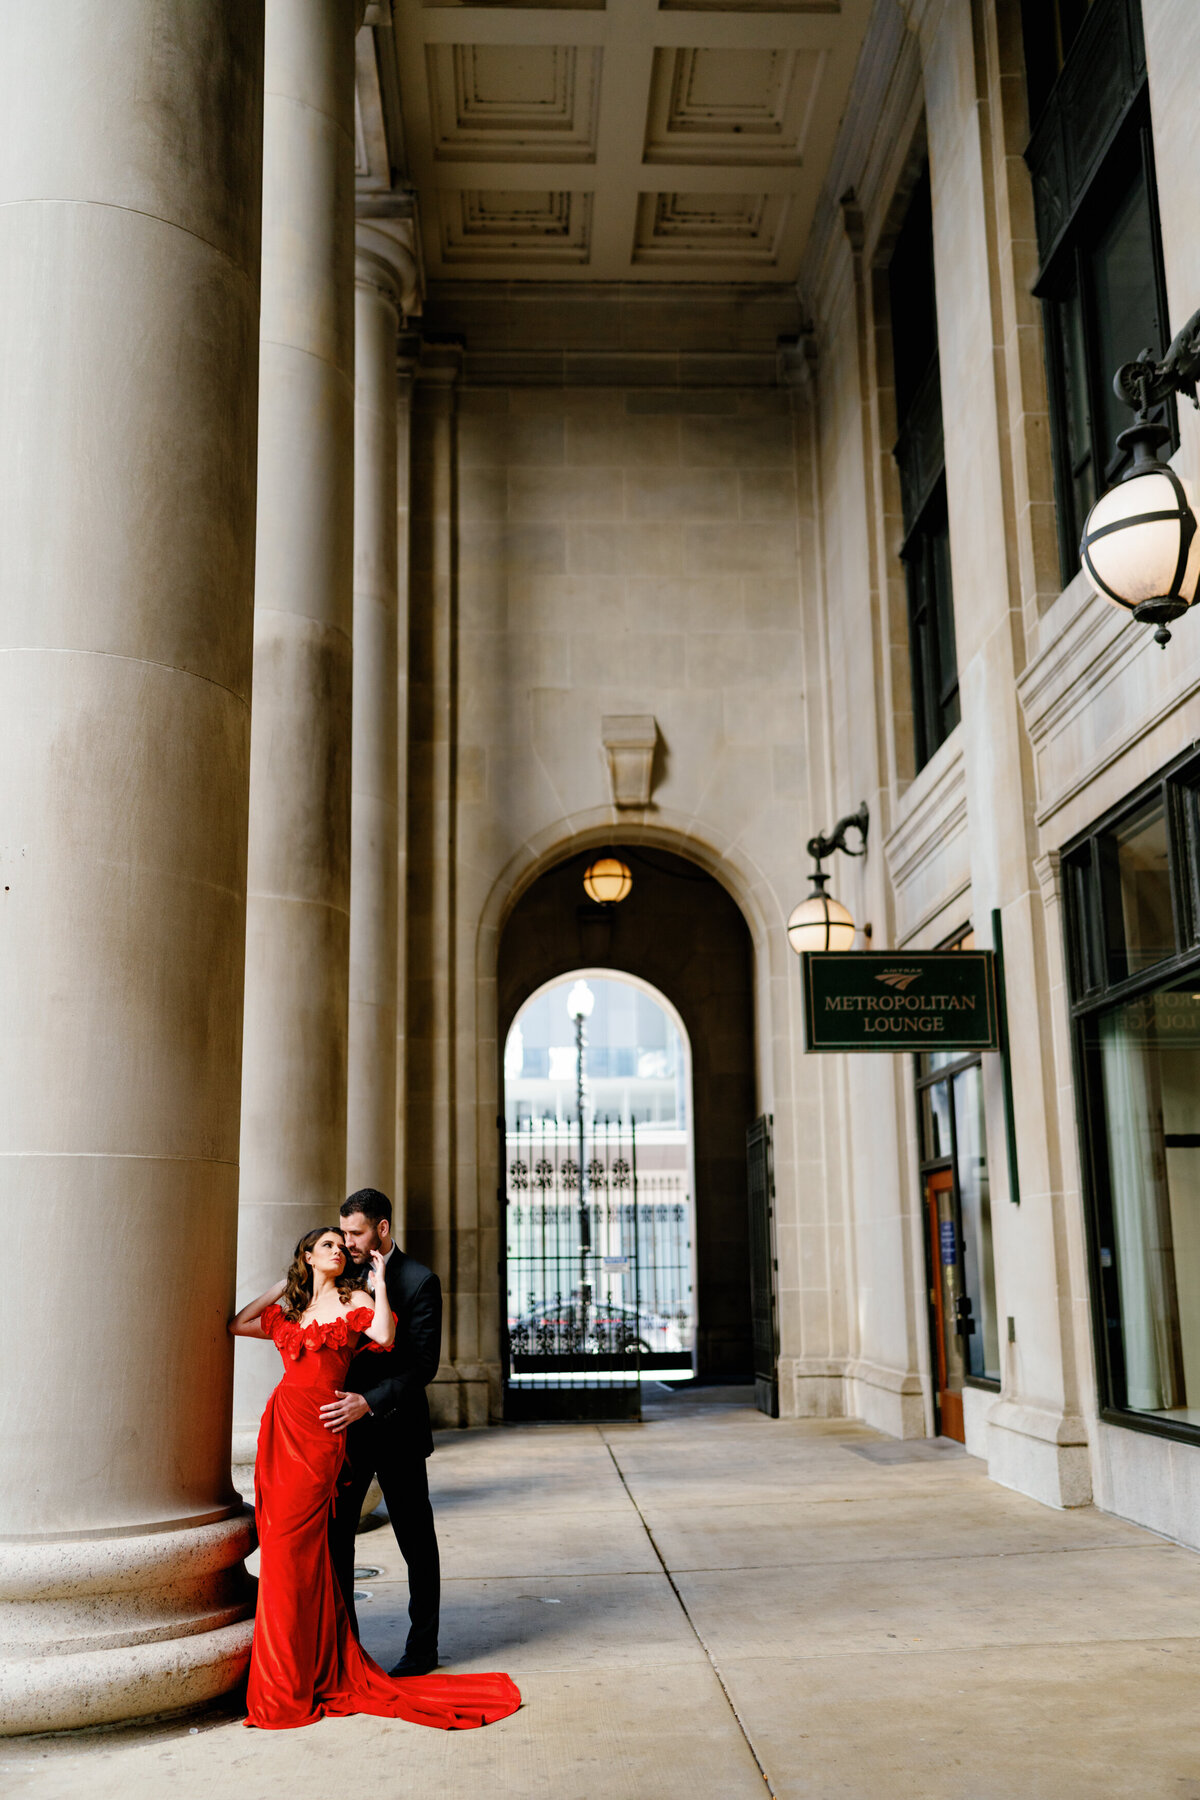 Aspen-Avenue-Chicago-Wedding-Photographer-Union-Station-Chicago-Theater-Engagement-Session-Timeless-Romantic-Red-Dress-Editorial-Stemming-From-Love-Bry-Jean-Artistry-The-Bridal-Collective-True-to-color-Luxury-FAV-65